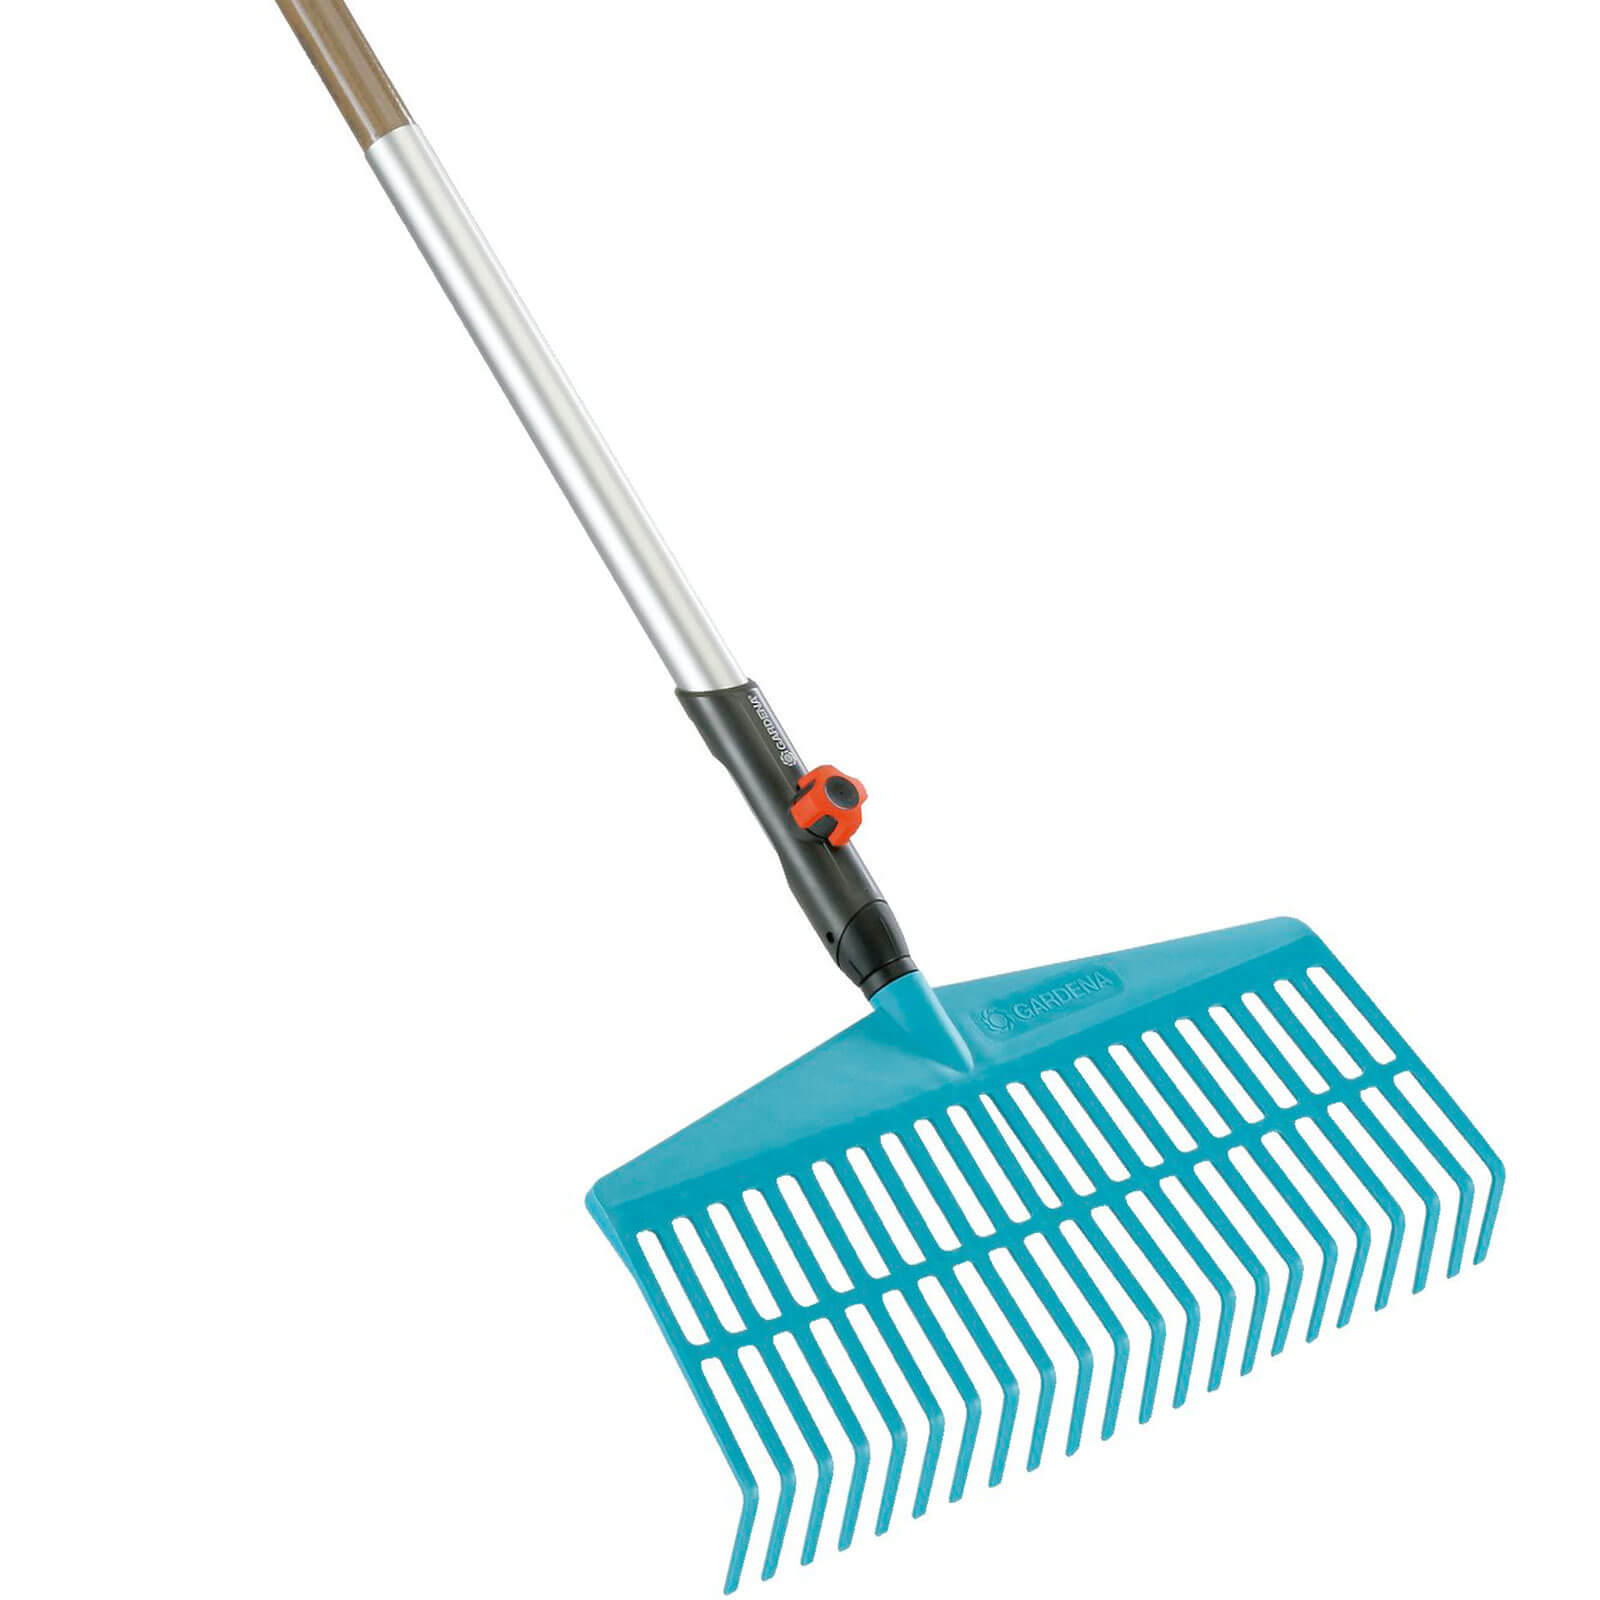 Gardena Combisystem Lawn Rake with Wooden Handle 1300mm